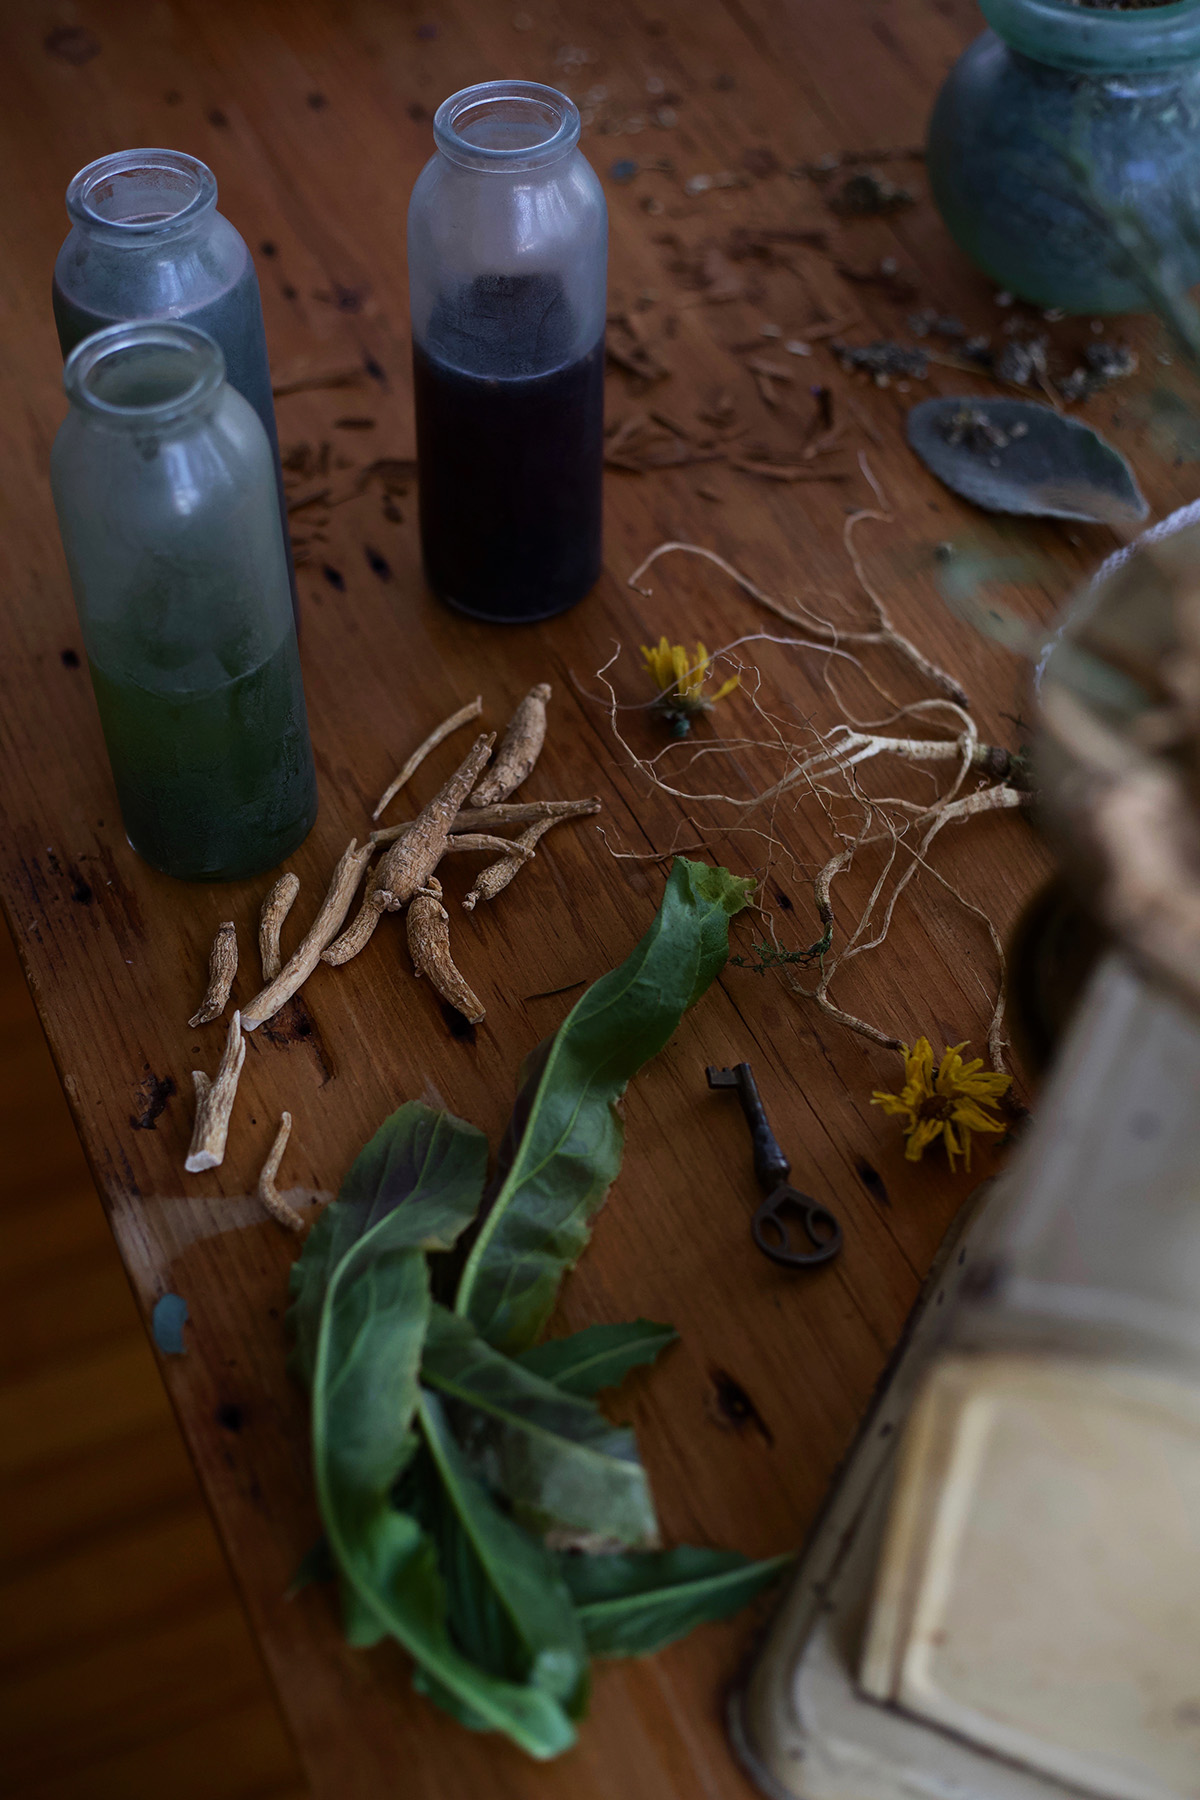 Herbalism: A History - How Herbalists Of The Past Paved The Way For Today | Herbal Academy | Have you ever wondered how modern-day herbalism came to be? Read on to discover how the history of herbalism paved the way for today.